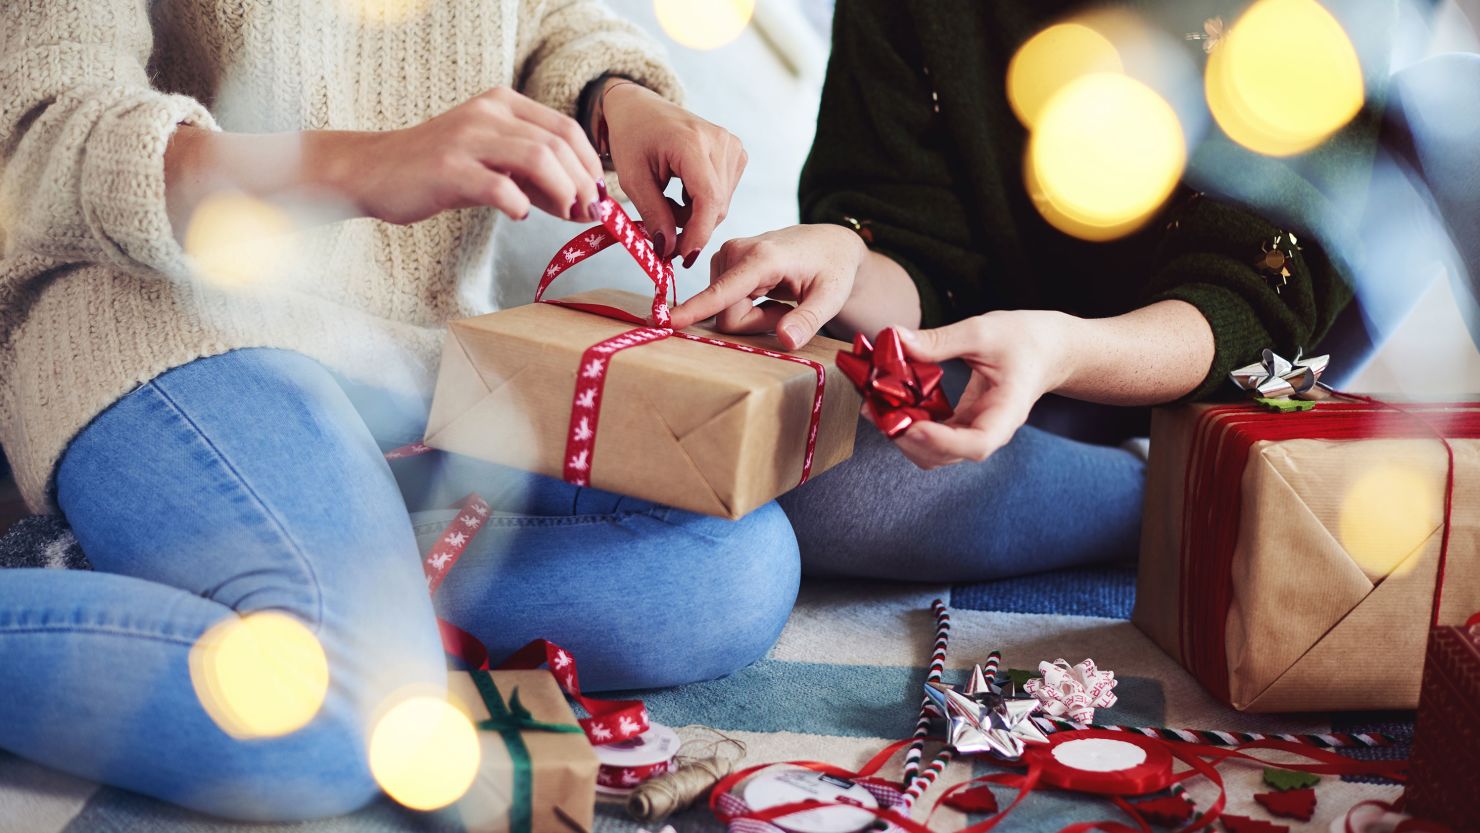 Here are three ways you can spread cheer while helping others during the holiday season. 